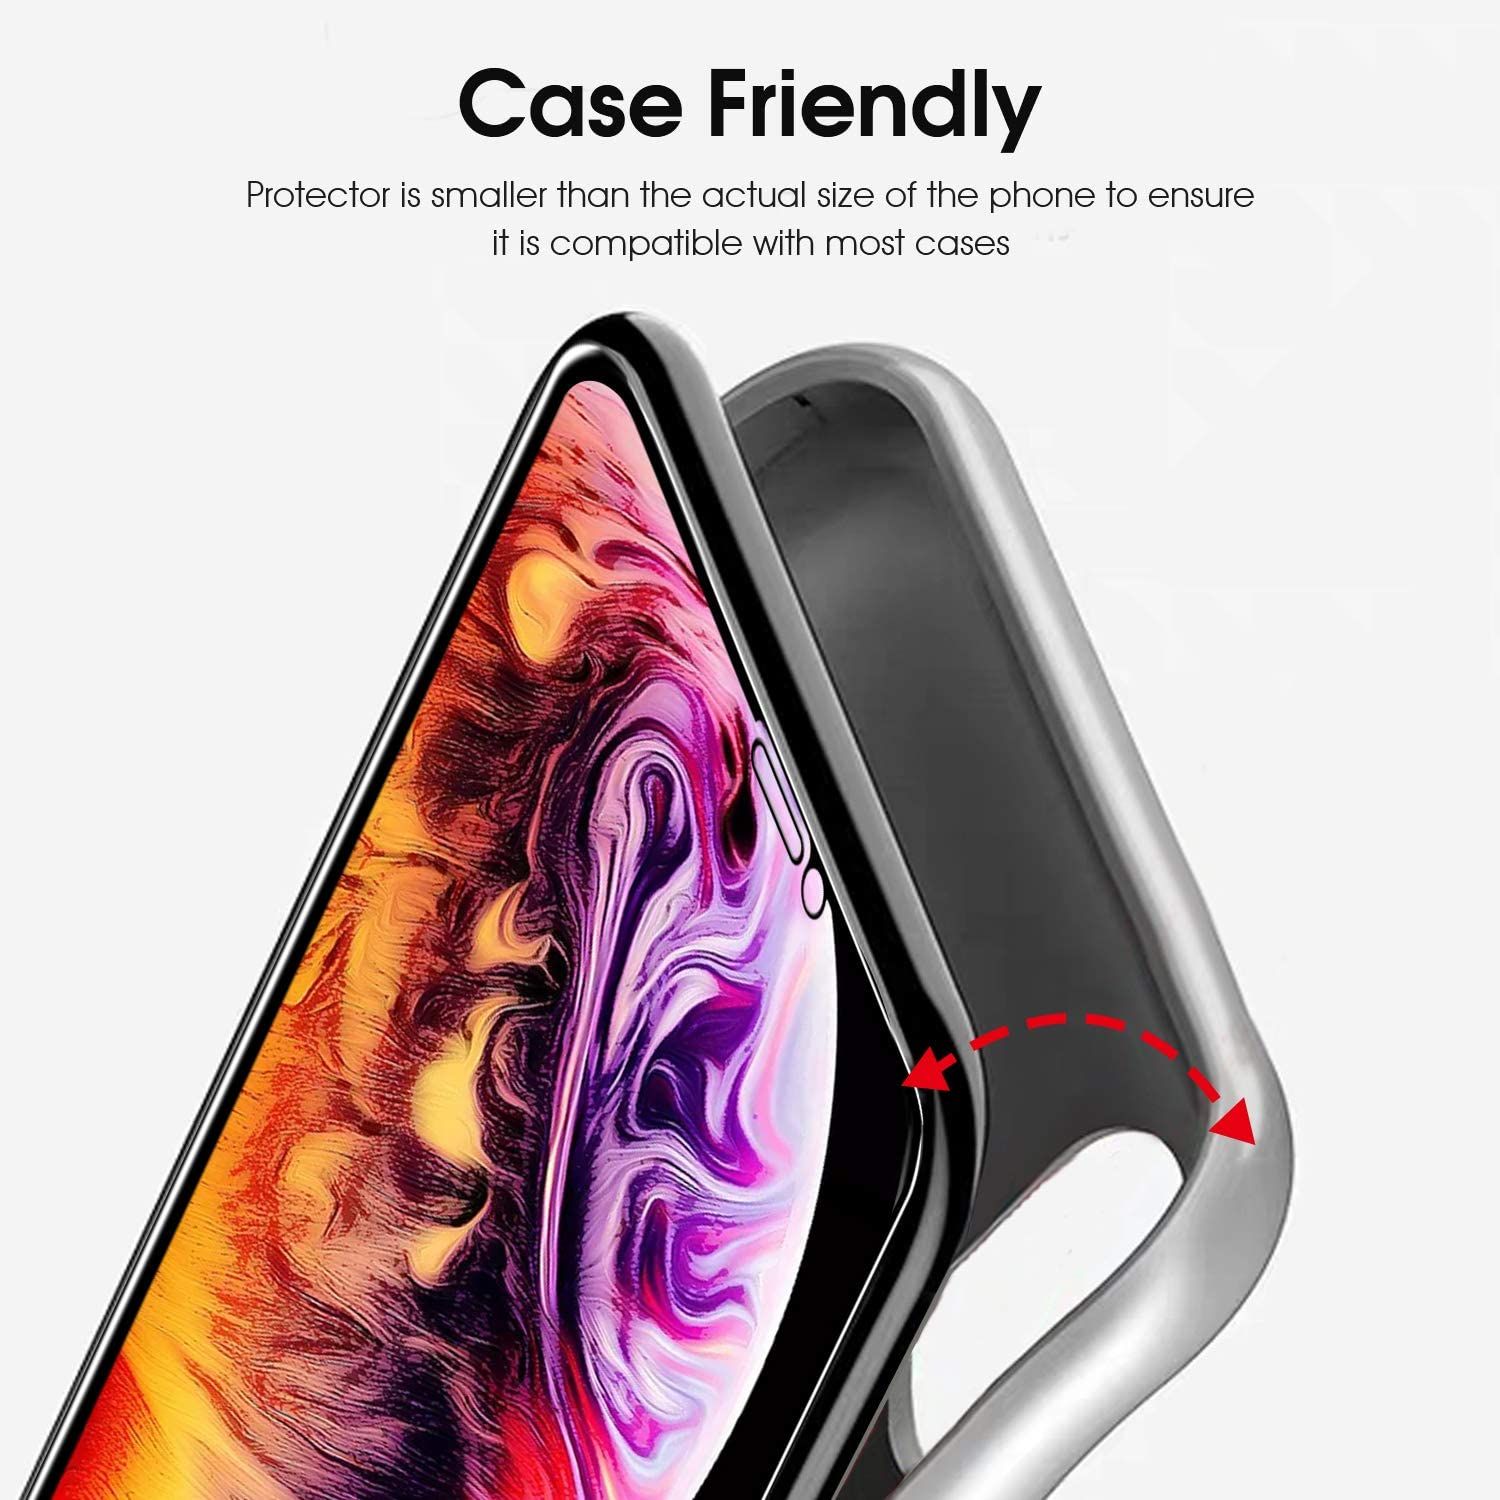 OTAO Privacy Screen Protector for iPhone 11 Pro Max and iPhone XS Max 03